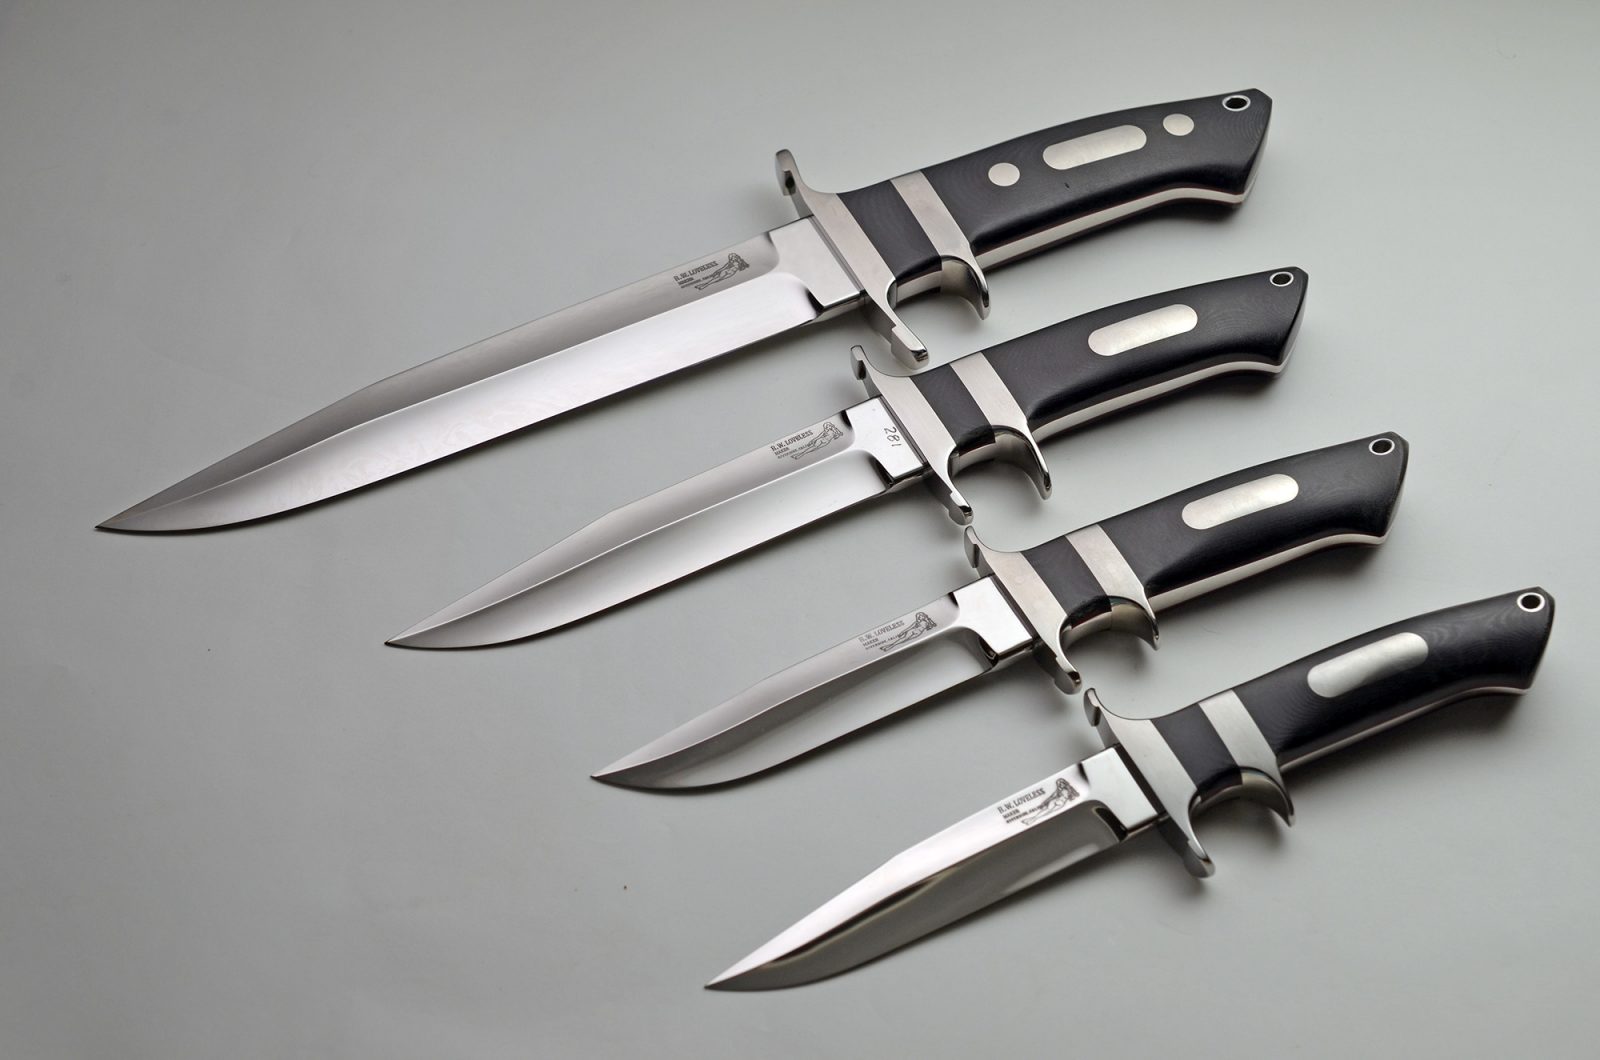 A Brief Look Into The Psychology of Collecting Knives